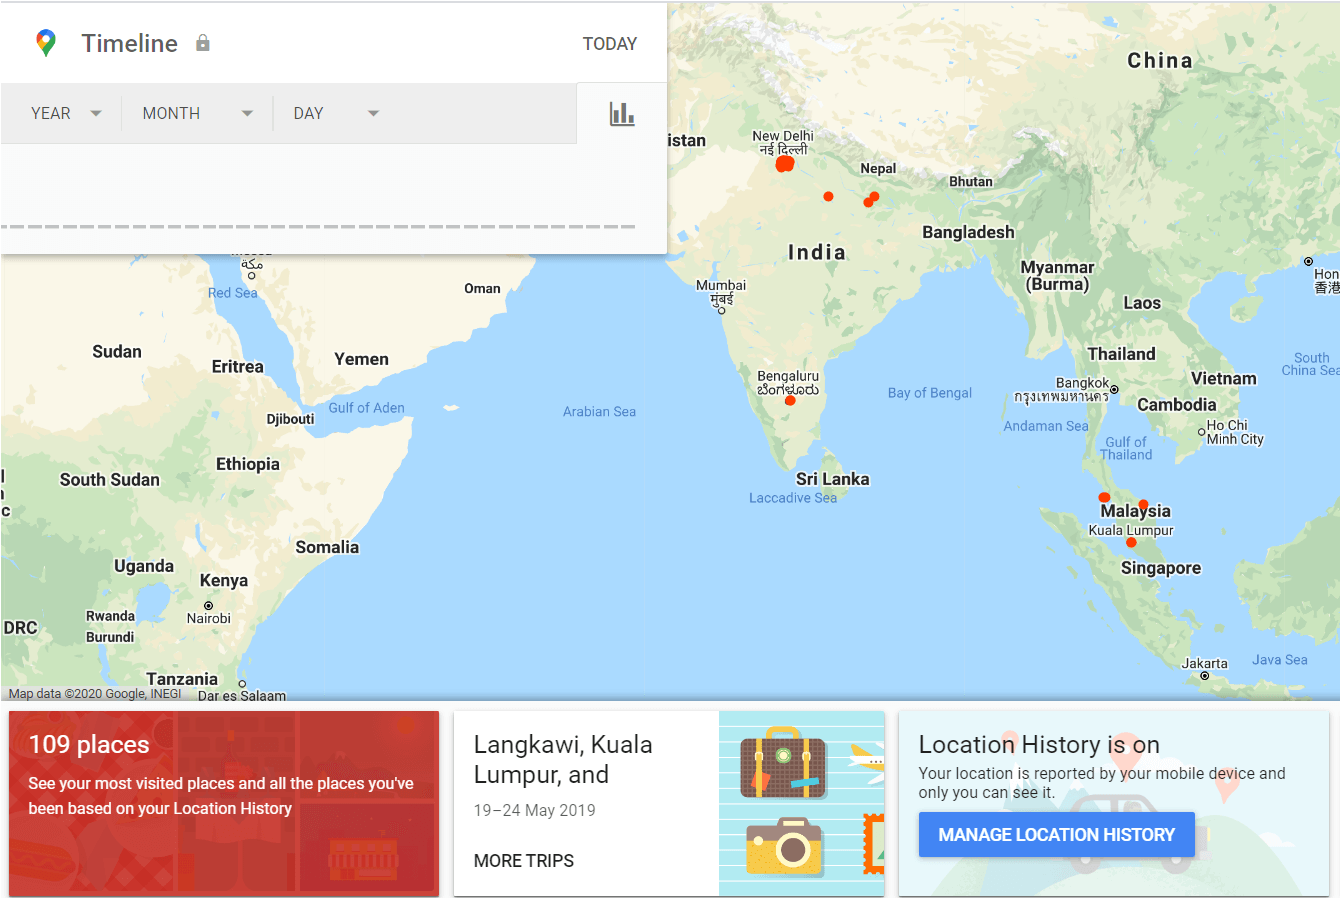 Google Maps Timeline Feature | View Location History in Google Maps